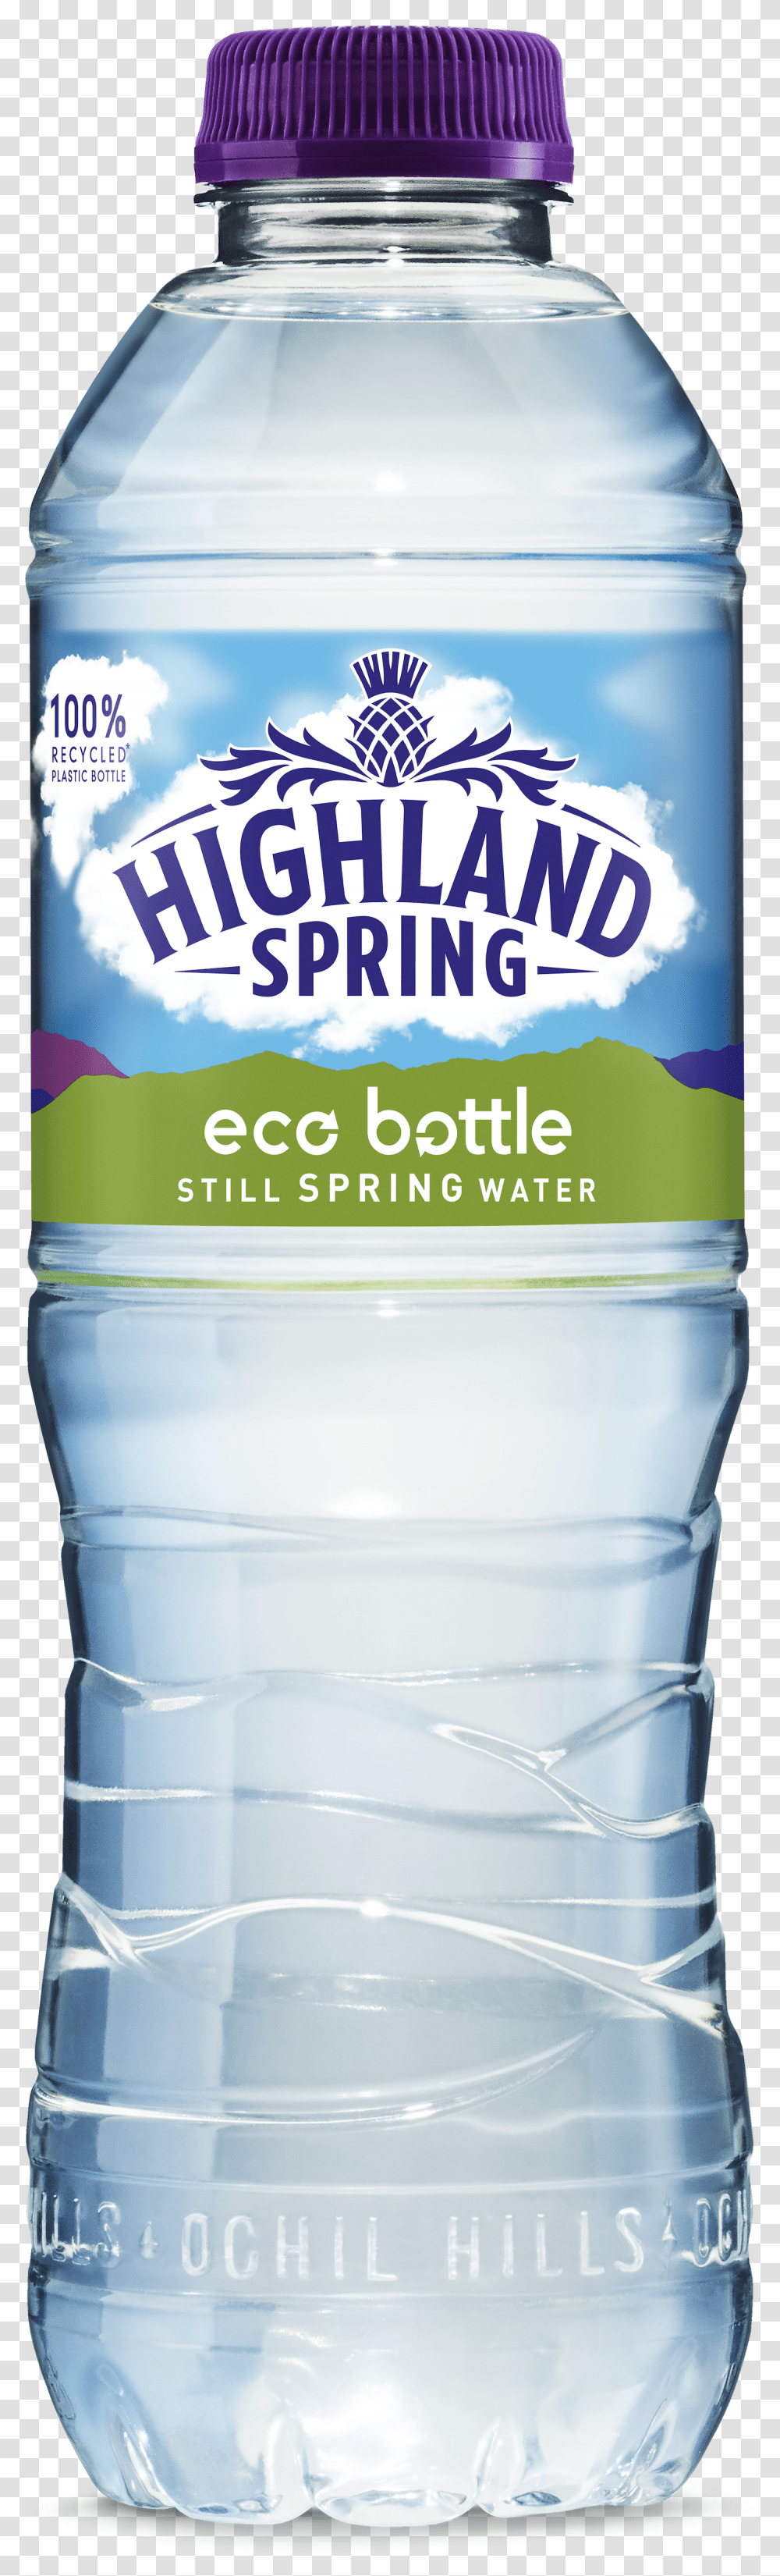 Highland Spring Eco Bottle In Layers Resized Transparent Png